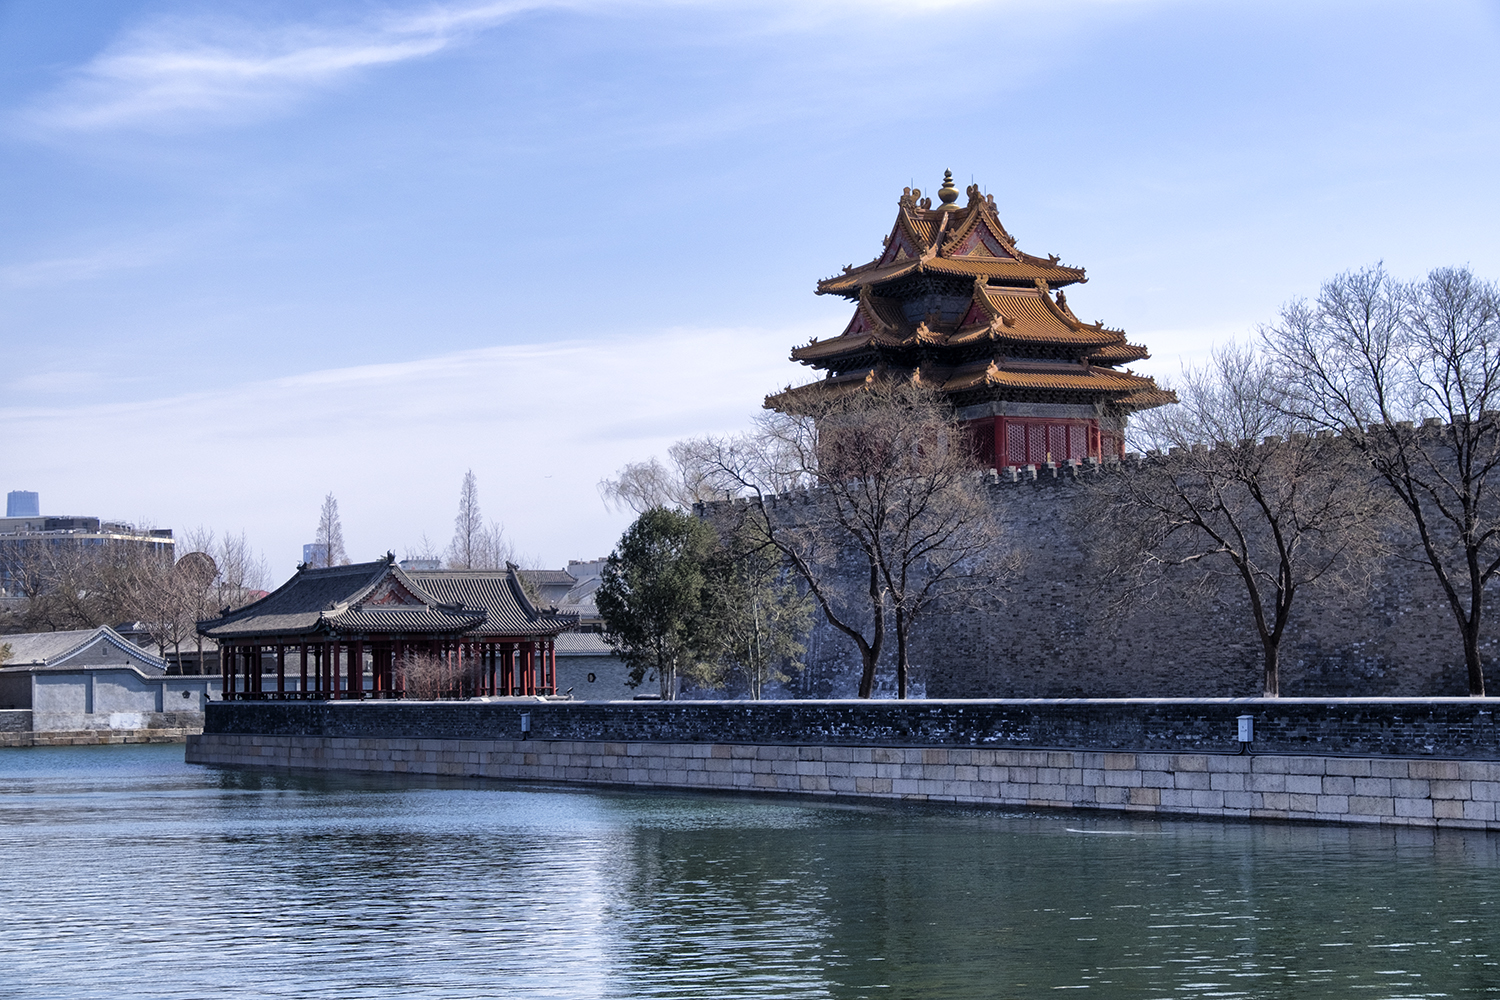 Forbidden City Wall, Watch Tower and Moat